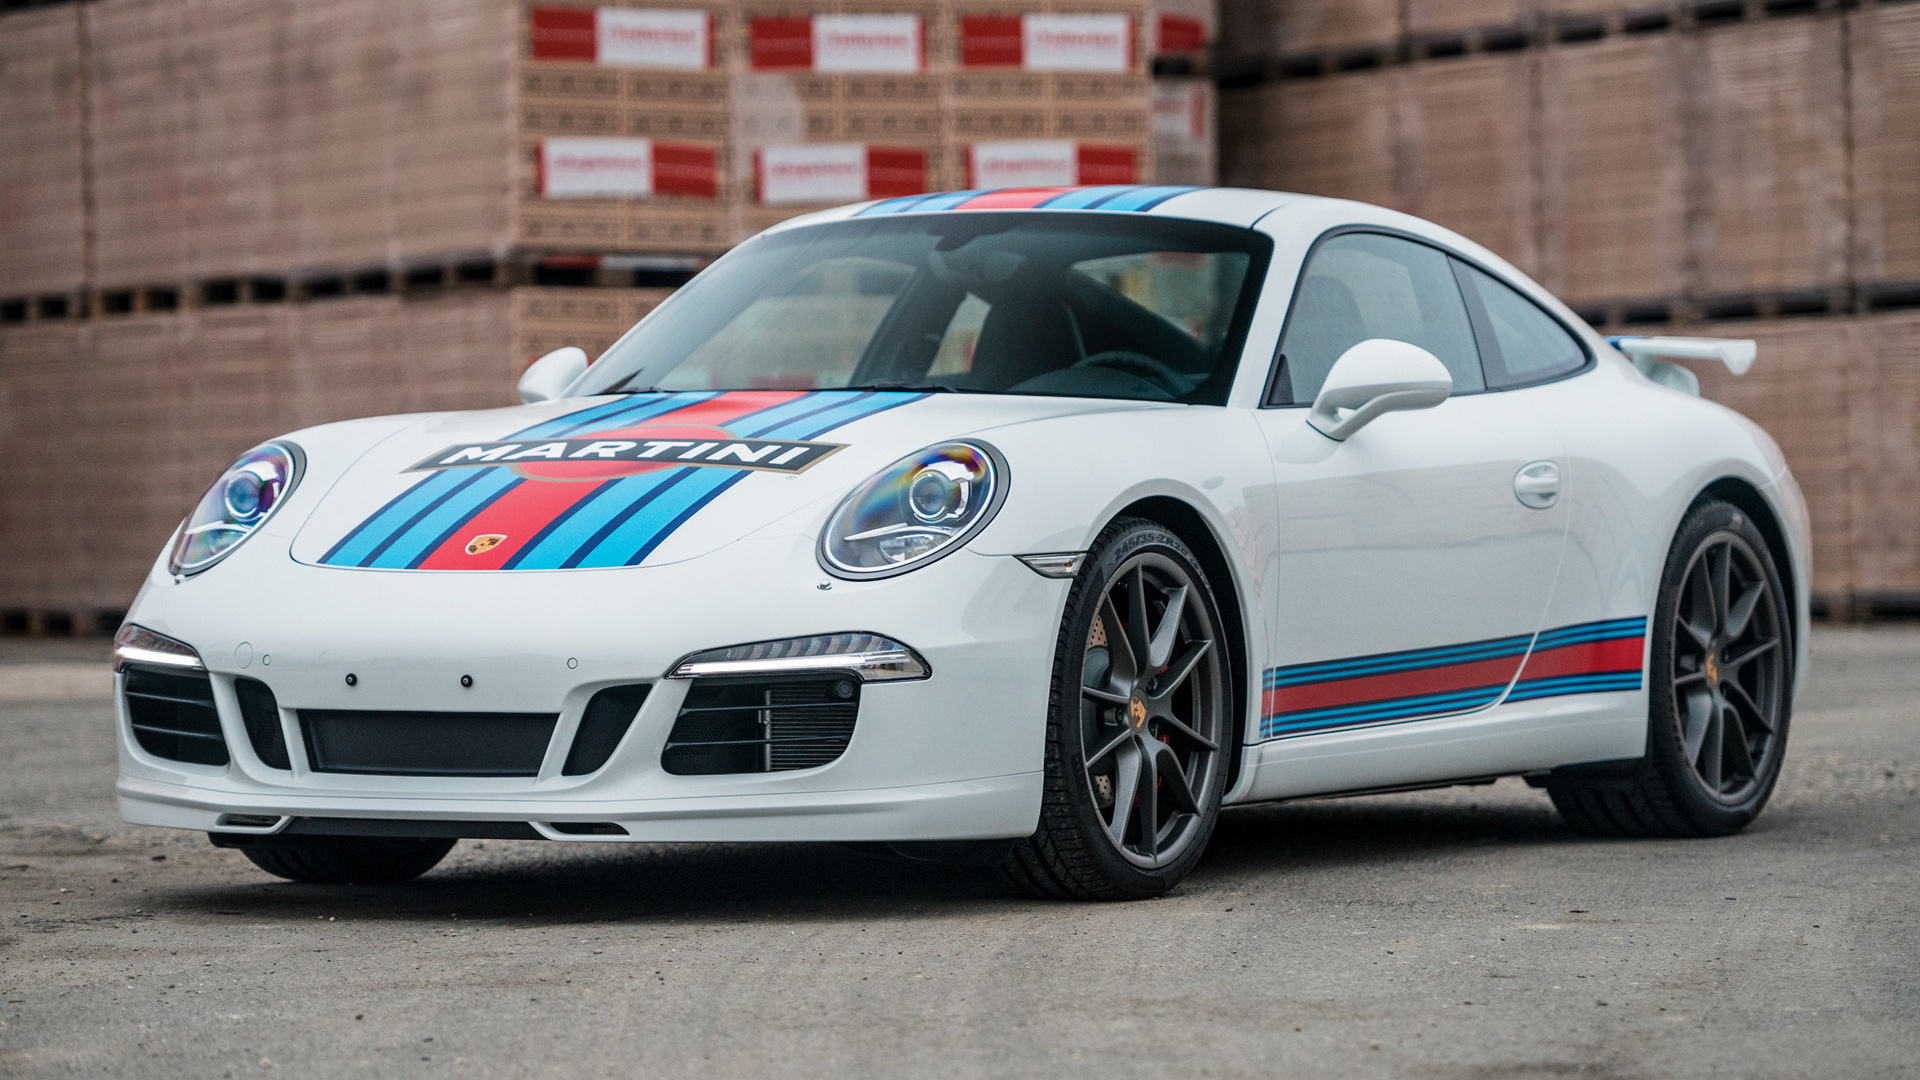 2014 Porsche 911 Carrera S Martini Racing Edition - Wallpapers and HD